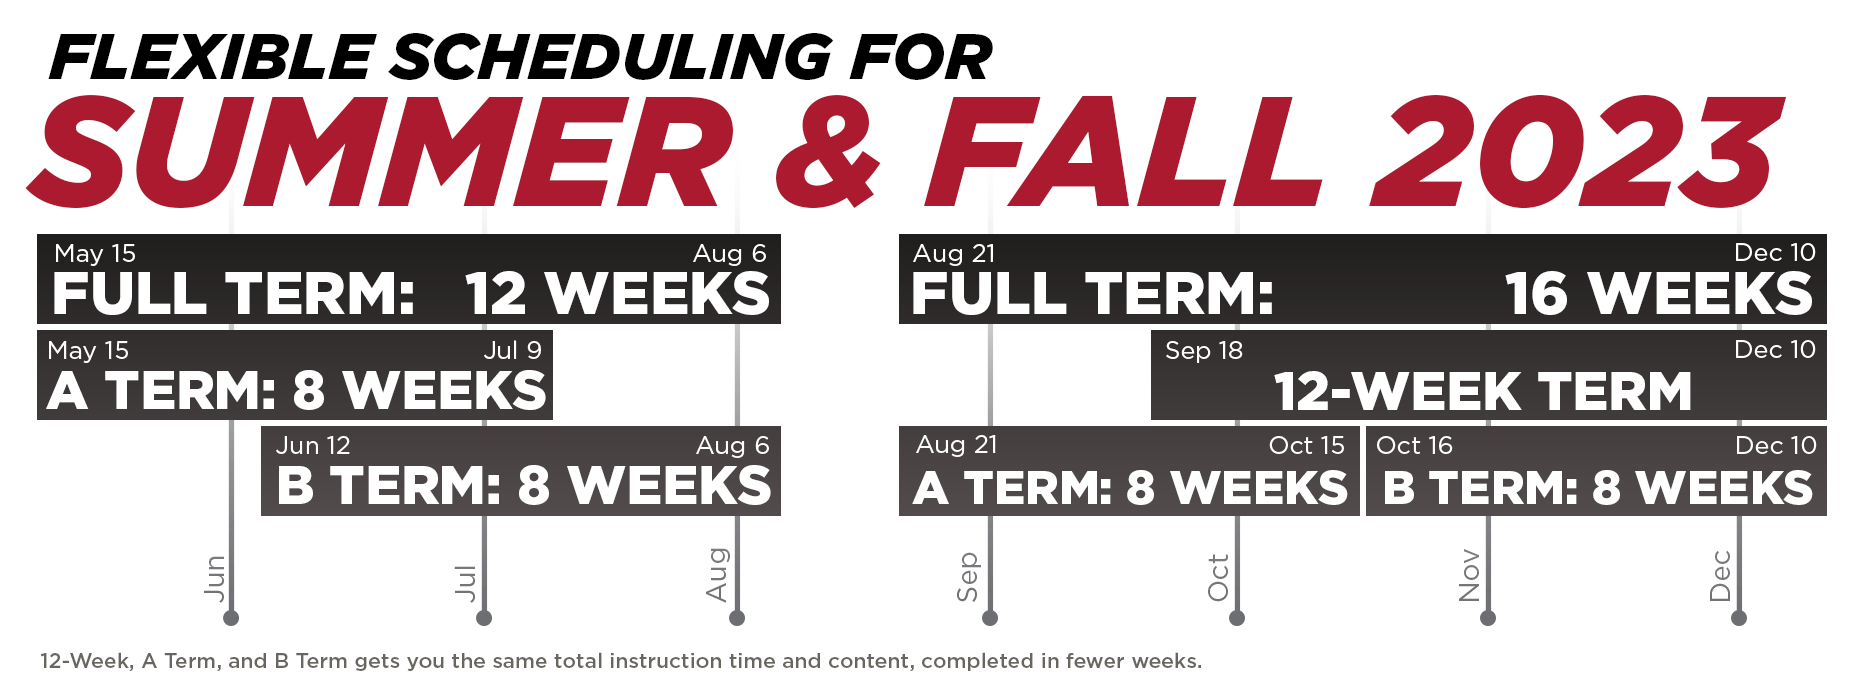 Summer Full Term classes began on May 15, 2023 and end on August 6, 2023 lasting 12-weeks total. A Term: 8-week classes began on May 15, 2023 and end on July 9, 2023. B Term: 8-week classes begin on June 12, 2023 and end on August 6, 2023. Fall 2023 Full Term classes began on August 23, 2023 and end on December 10, 2023 lasting 16-weeks total. 12-week Term classes begin September 18, 2023 and end on March 5, 2023. A Term: 8-week classes began on August 21, 2023 and end on October 15, 2023. B Term: 8-week classes begin on October 16, 2023 and end on December 10, 2023.